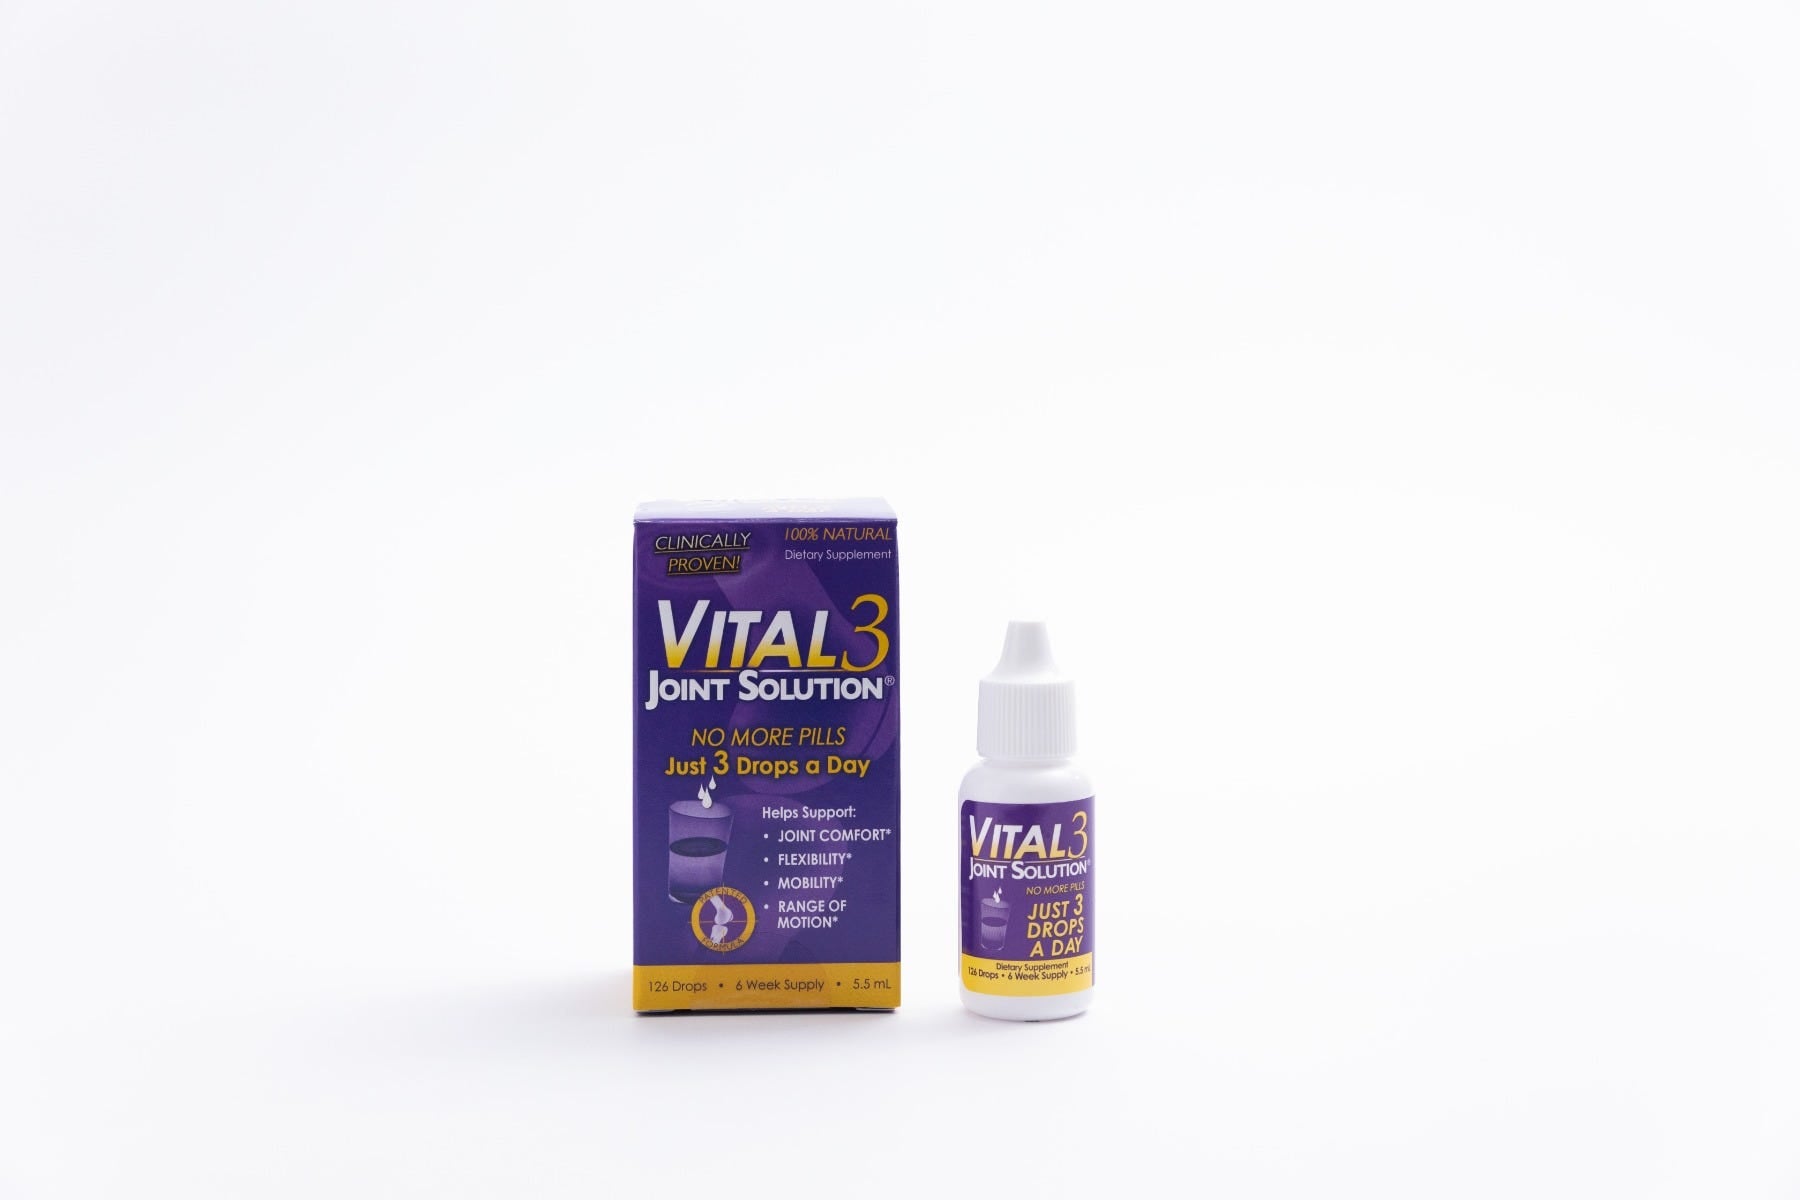 Vital3 Joint Solution® Liquid Clinically Proven - 5.5 mL view 7 of 11